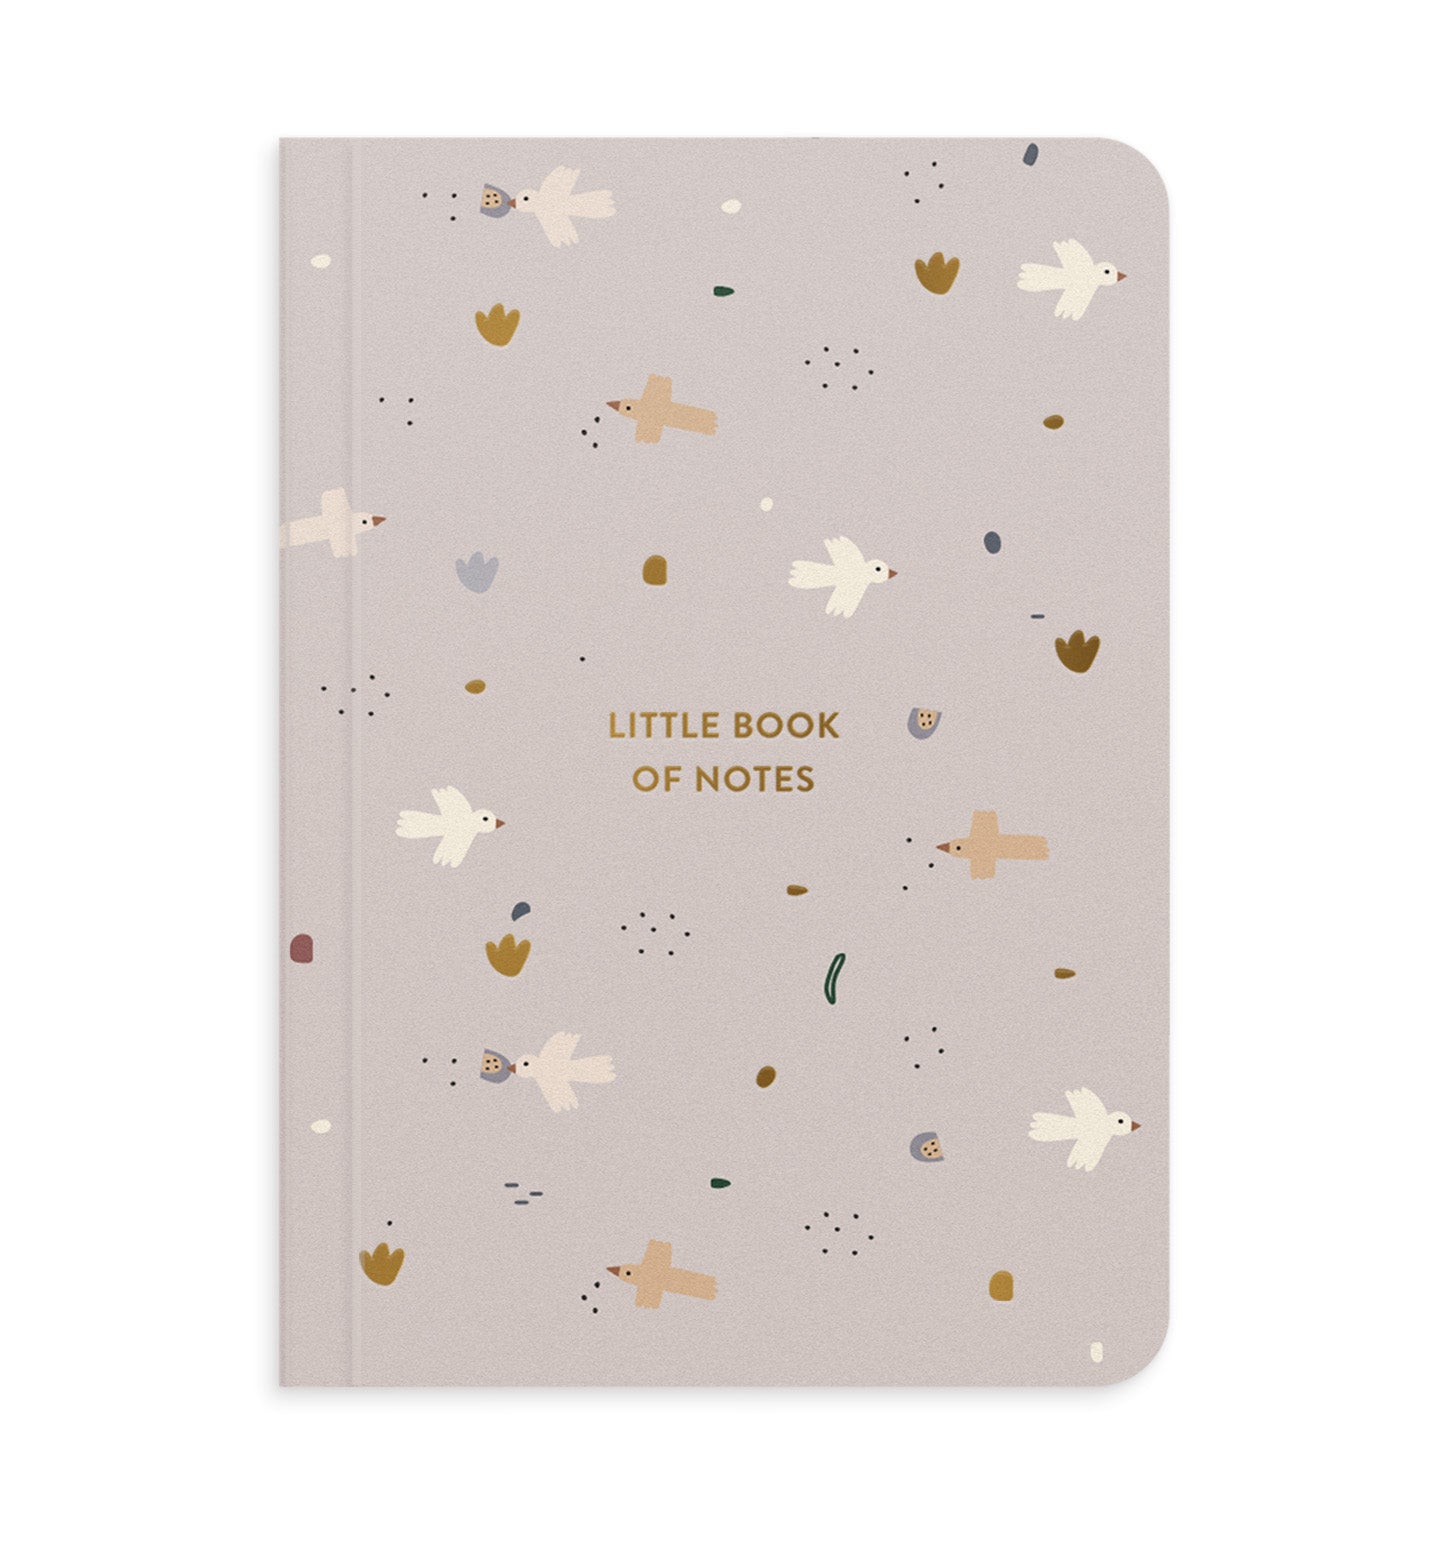 Little Book of Notes (6550560538795)